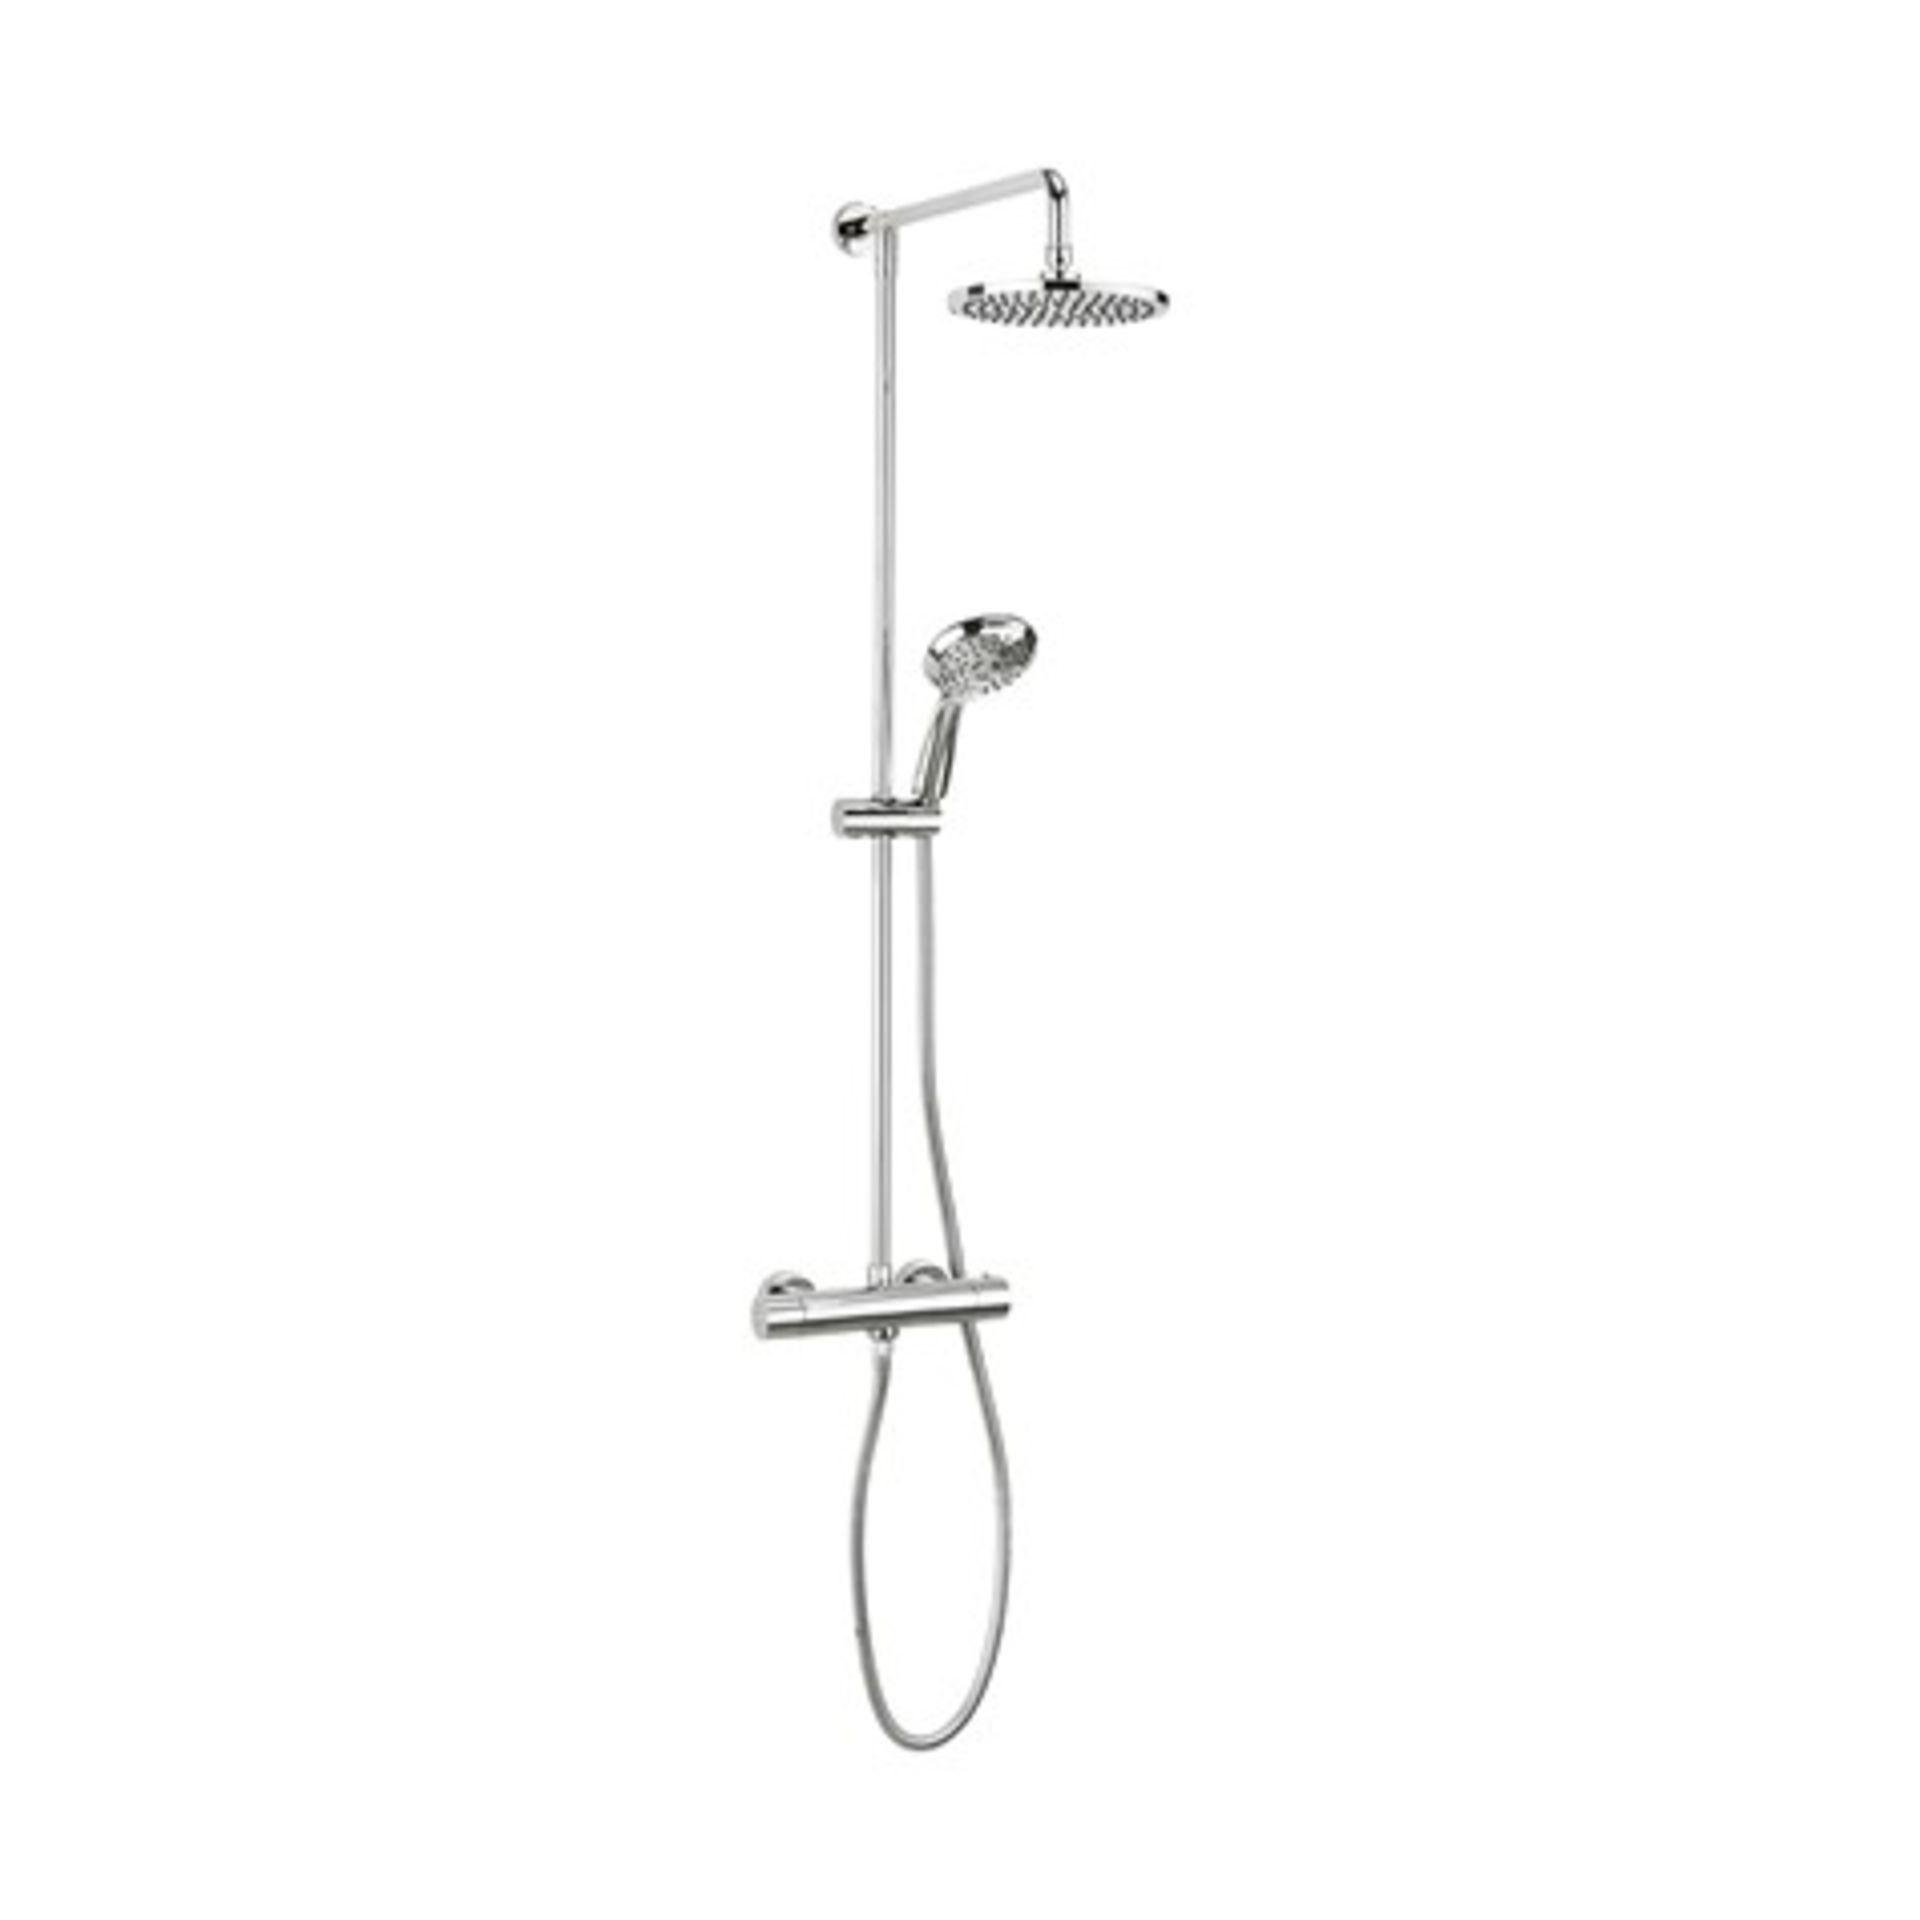 Fusion Multifunction Thermostatic Shower Valve with Fixed Head & Three Mode Shower Kit - Image 2 of 9